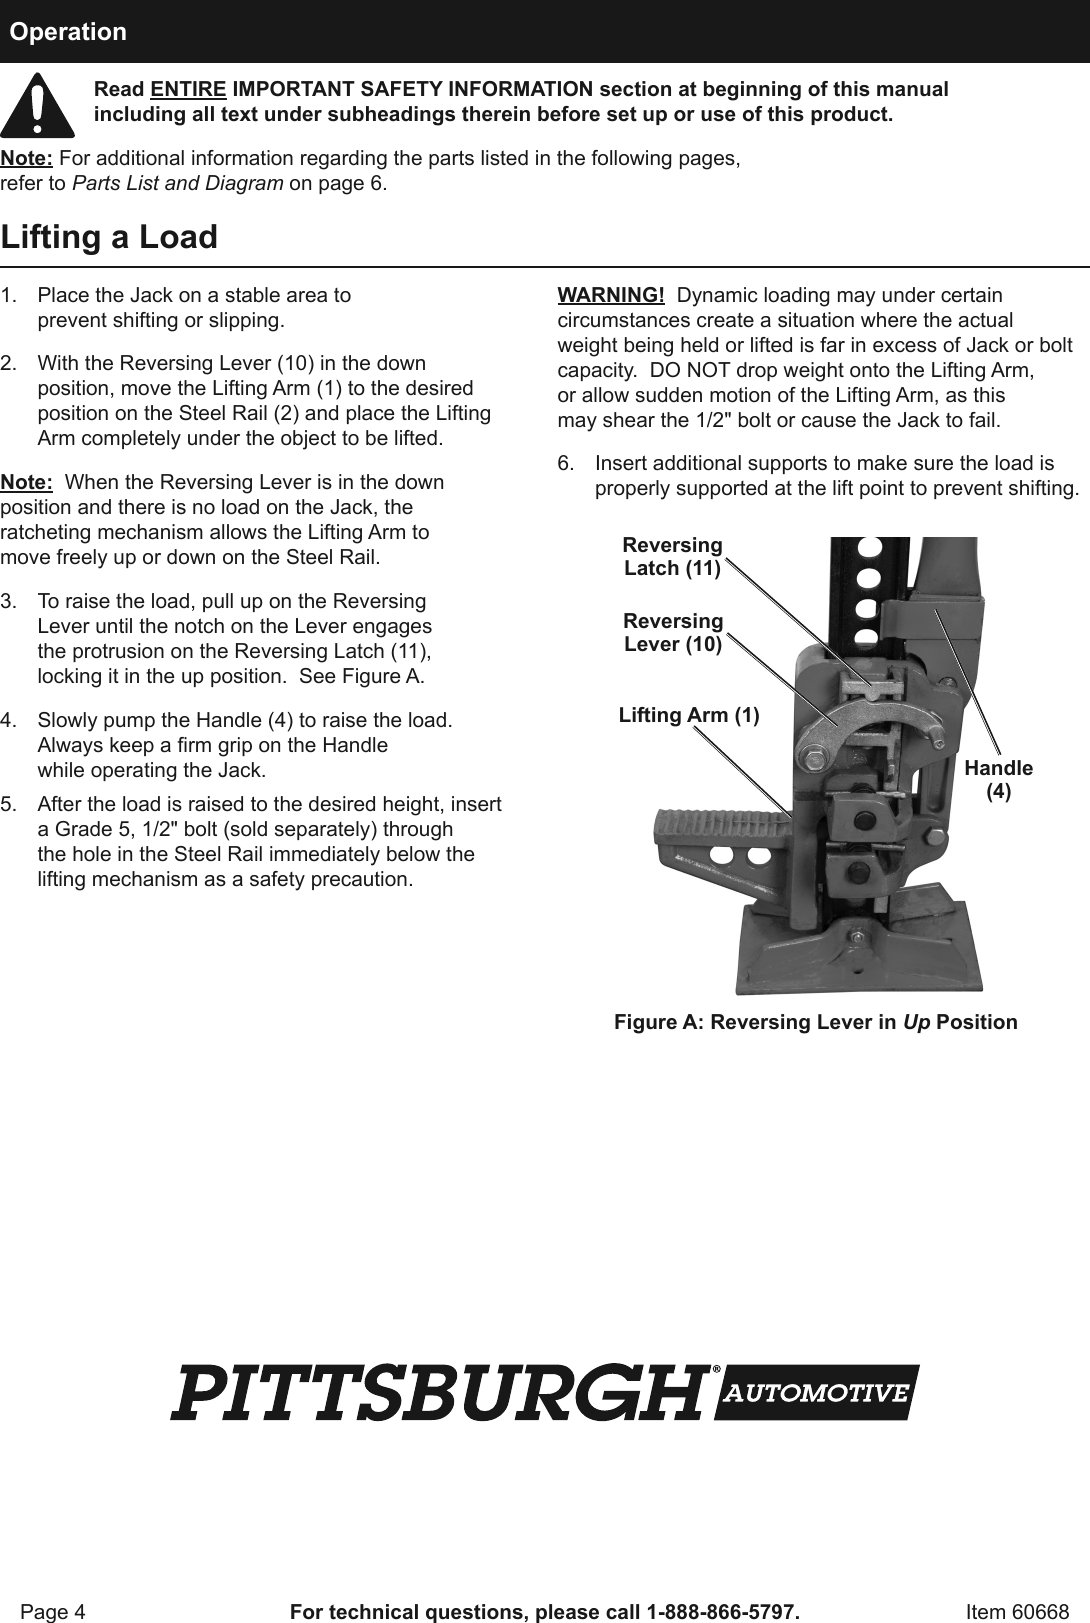 Page 4 of 8 - Manual For The 60668 42 In. High Lift Farm Jack